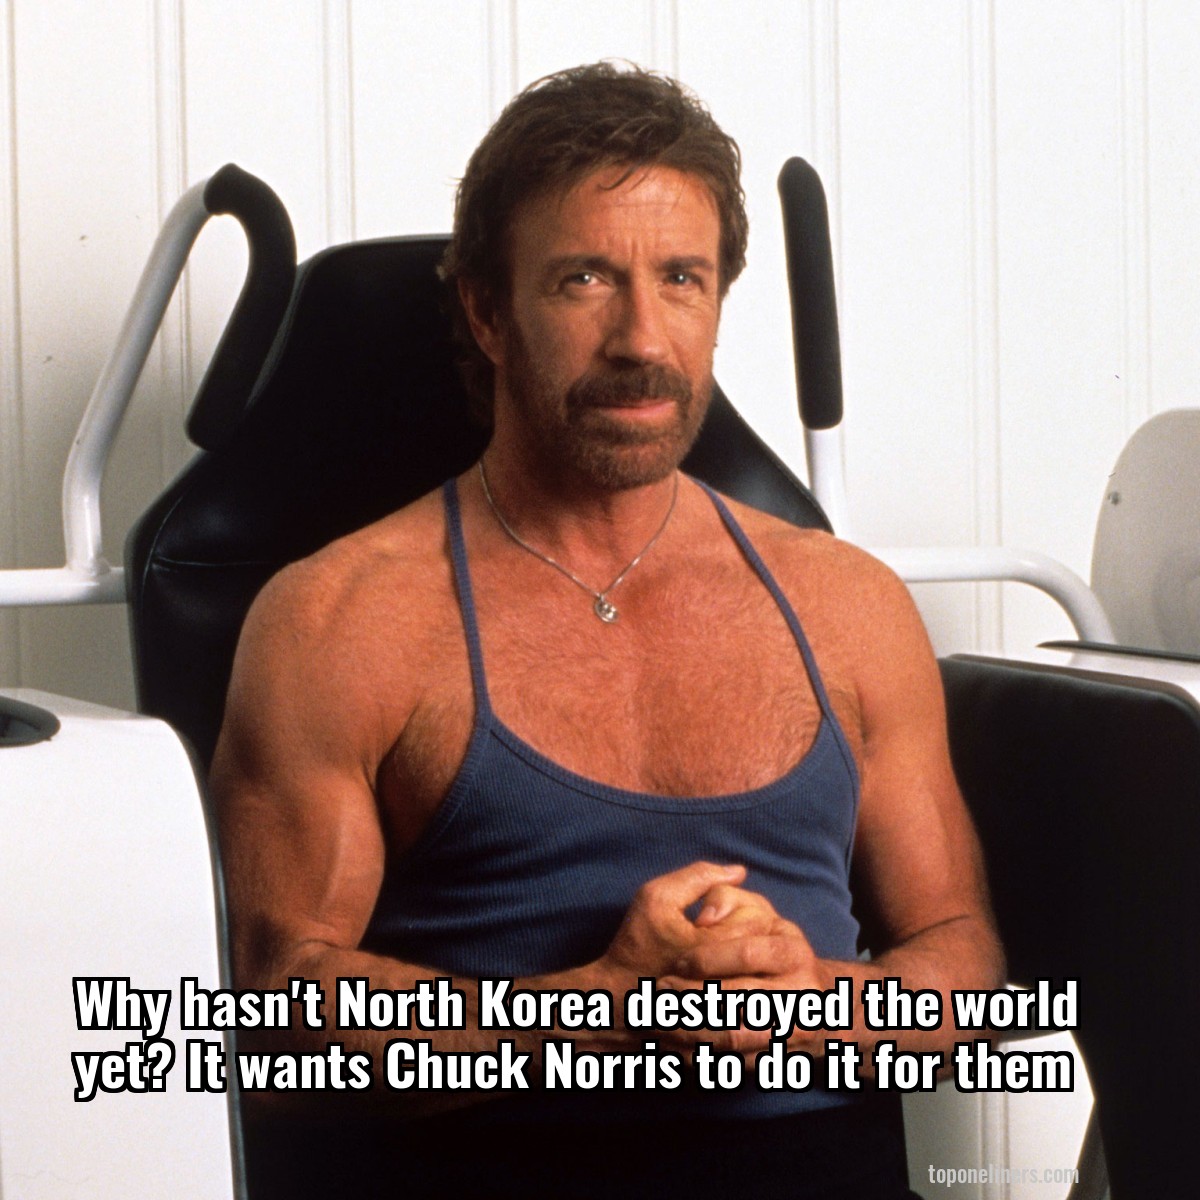 Why hasn't North Korea destroyed the world yet? It wants Chuck Norris to do it for them